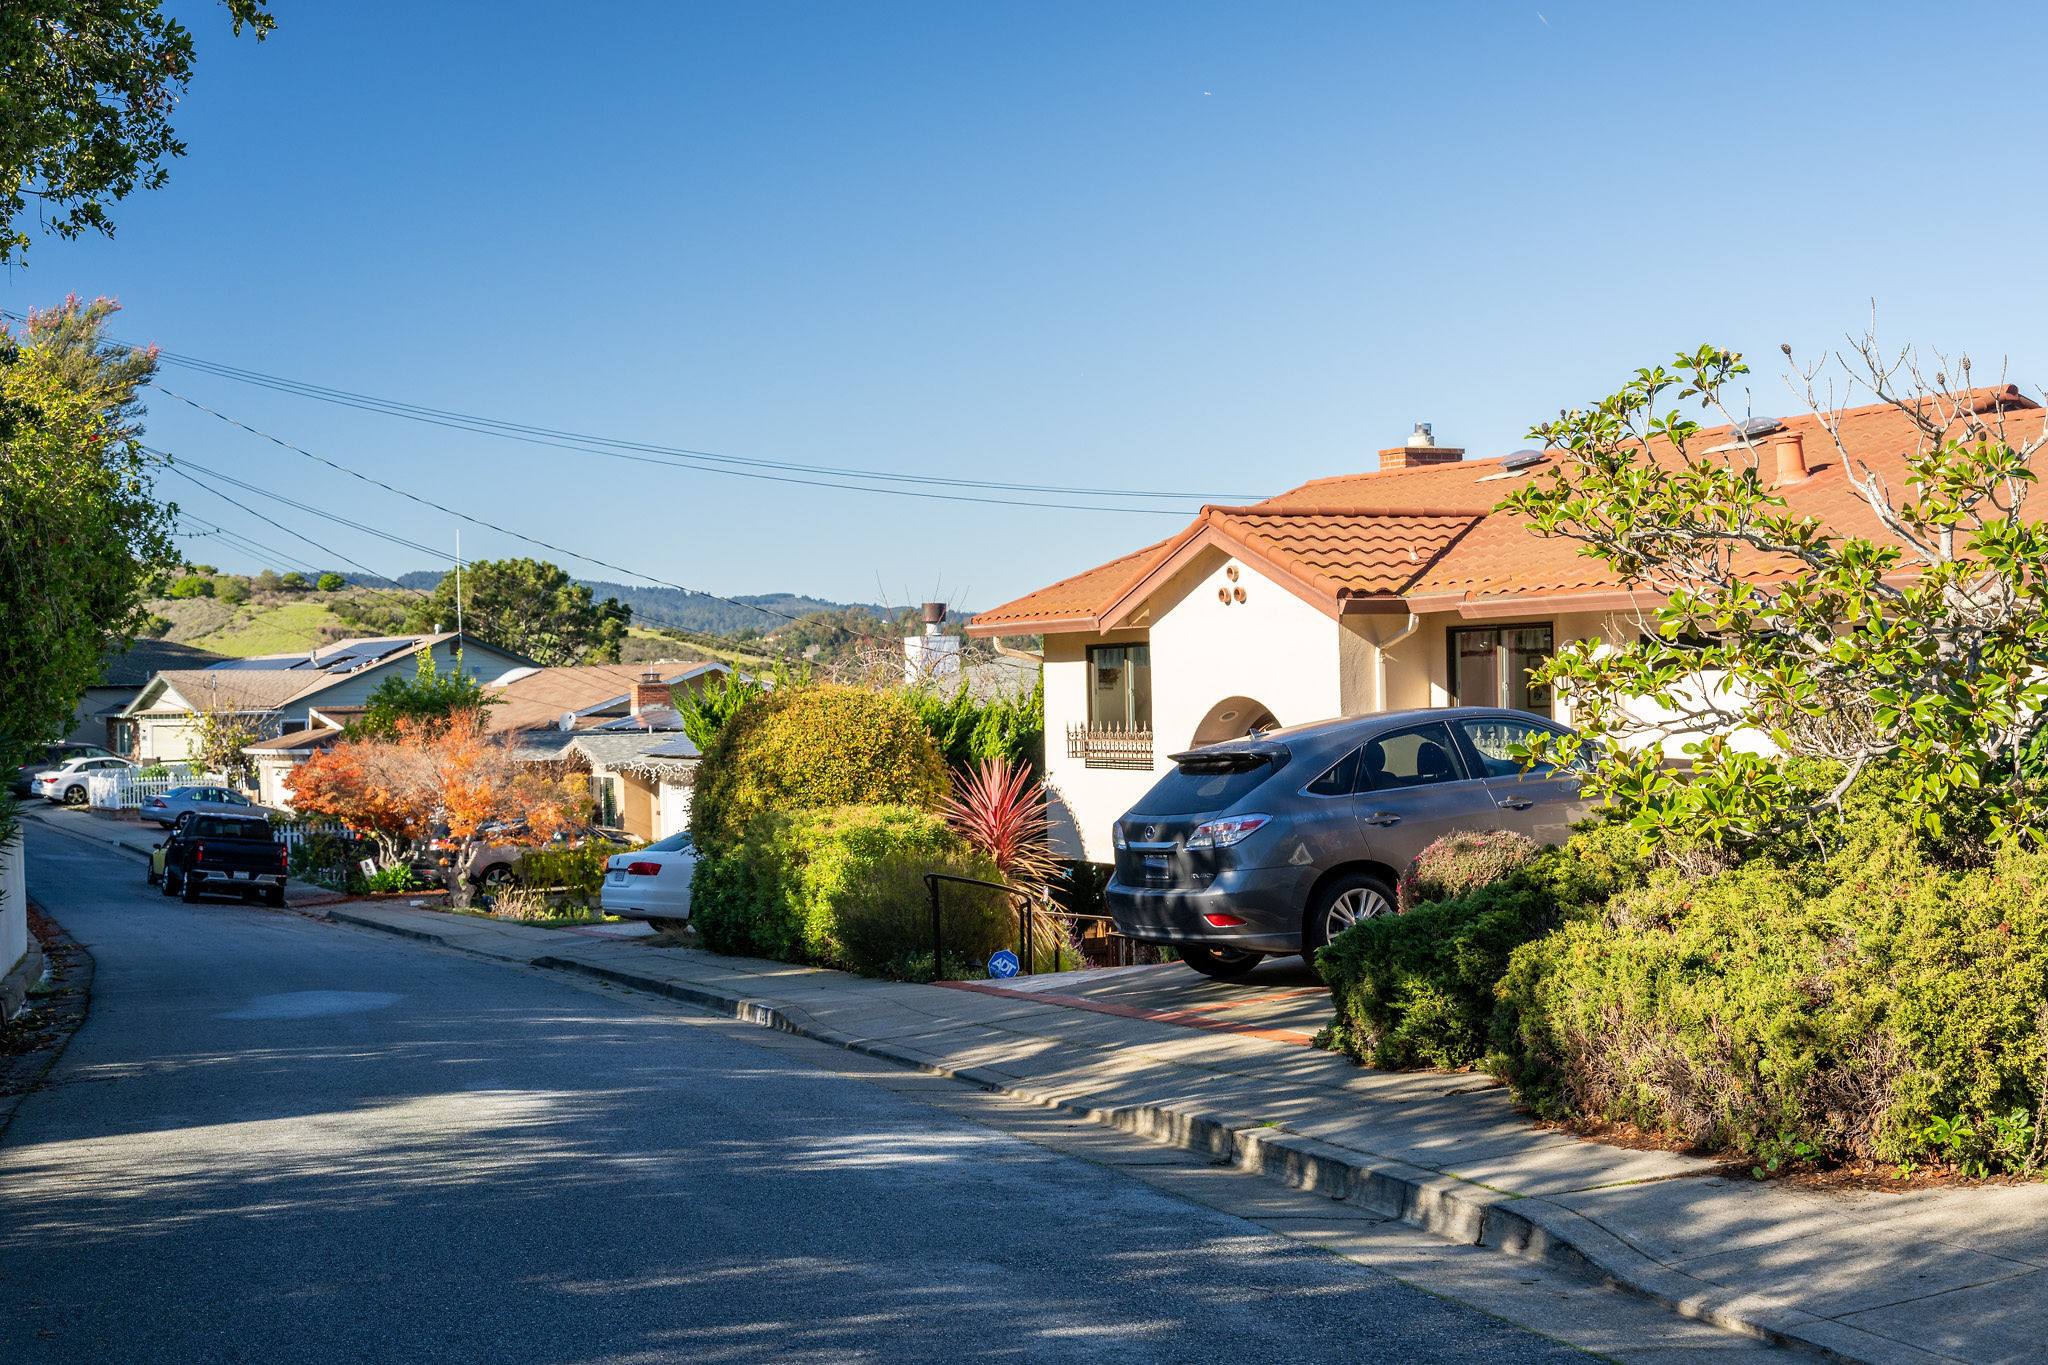 Narrow street with mountain view  in the San Mateo Knolls area in San Mateo